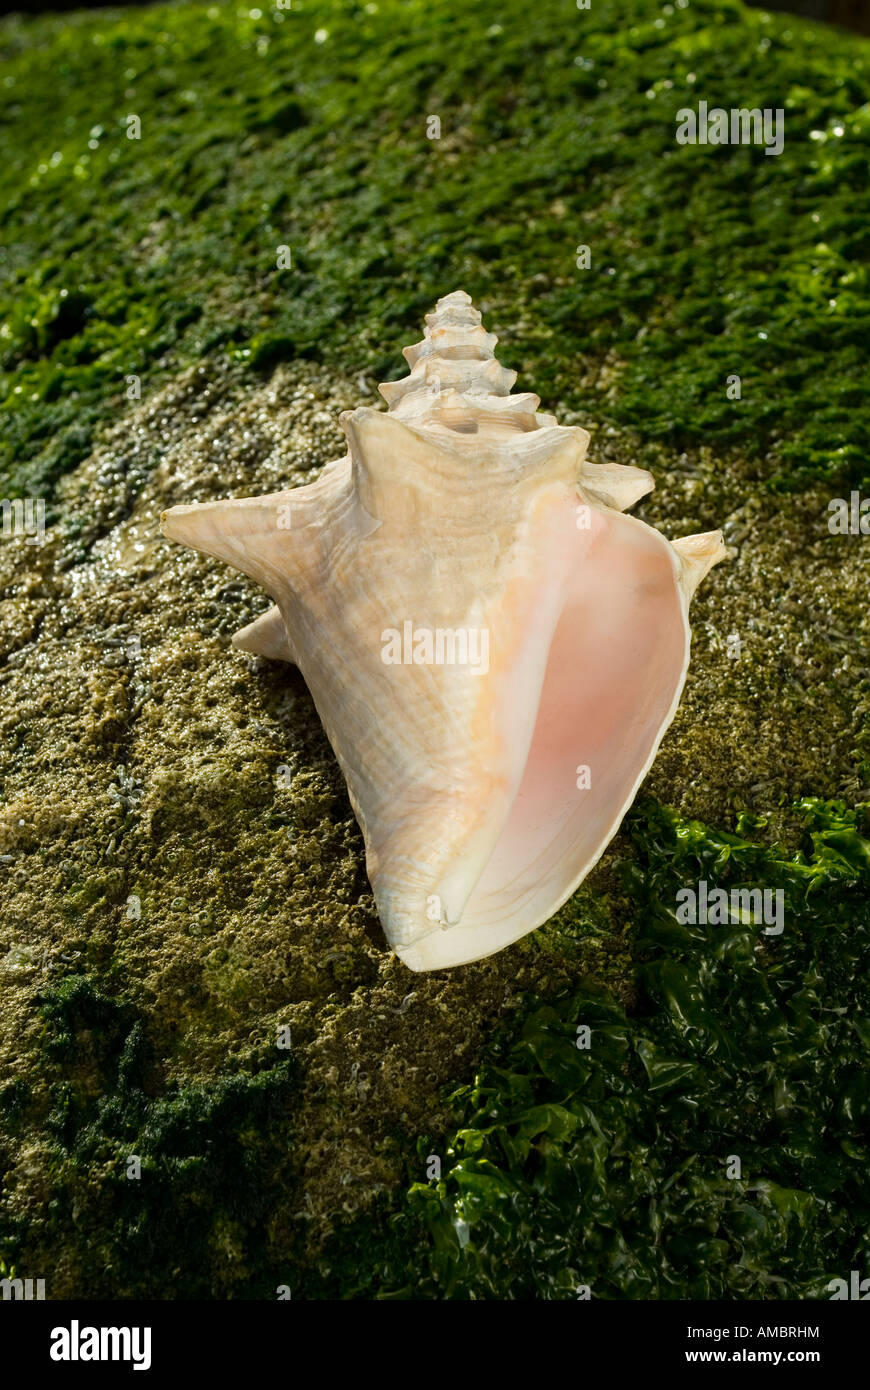 Adult Queen Conch shell Strombus gigas Stock Photo